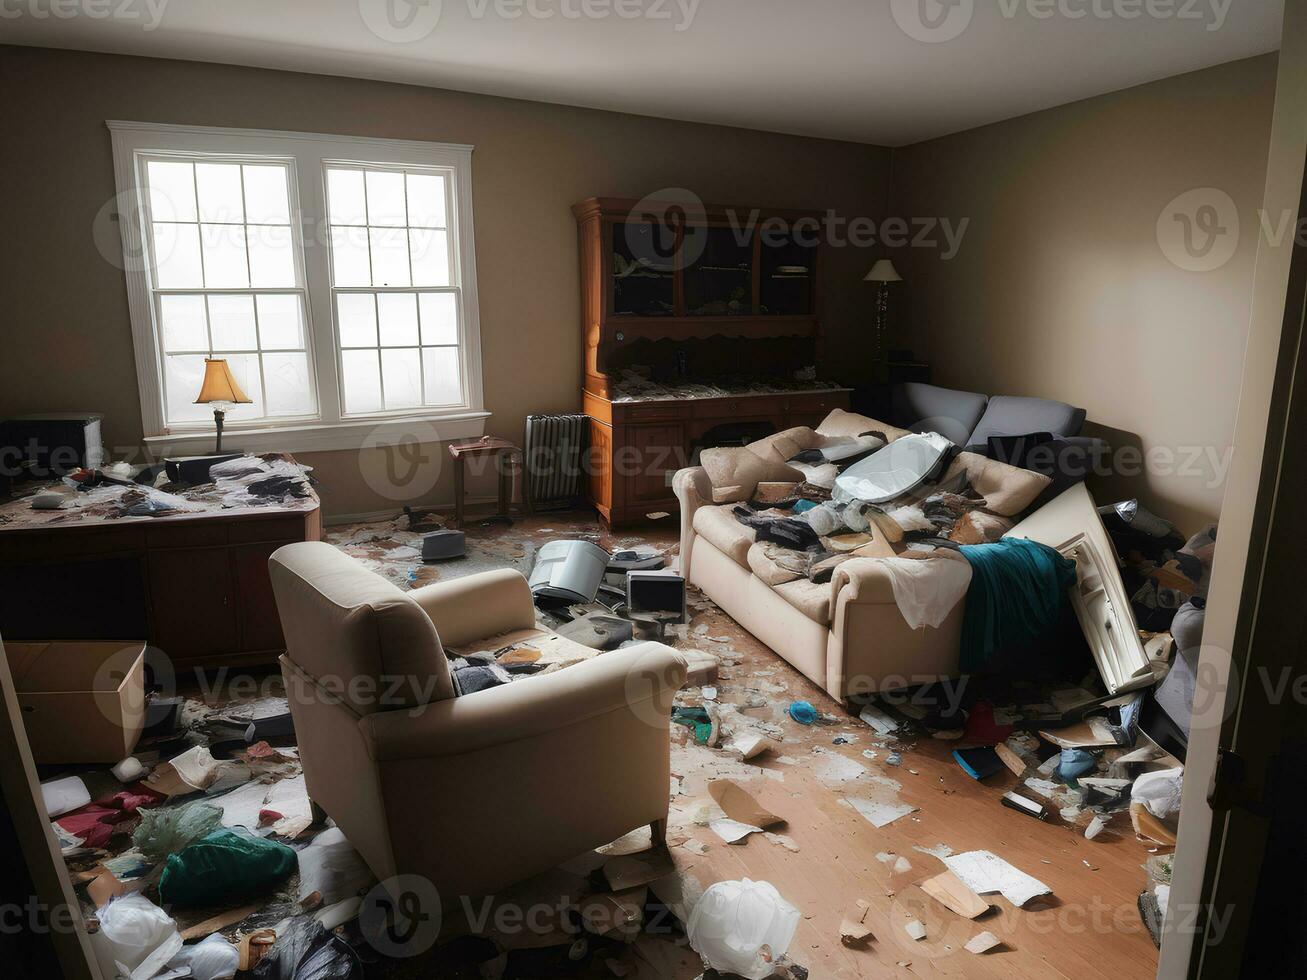 Photograph of a cluttered living space filled with trash debris broken furniture, AI Generative photo